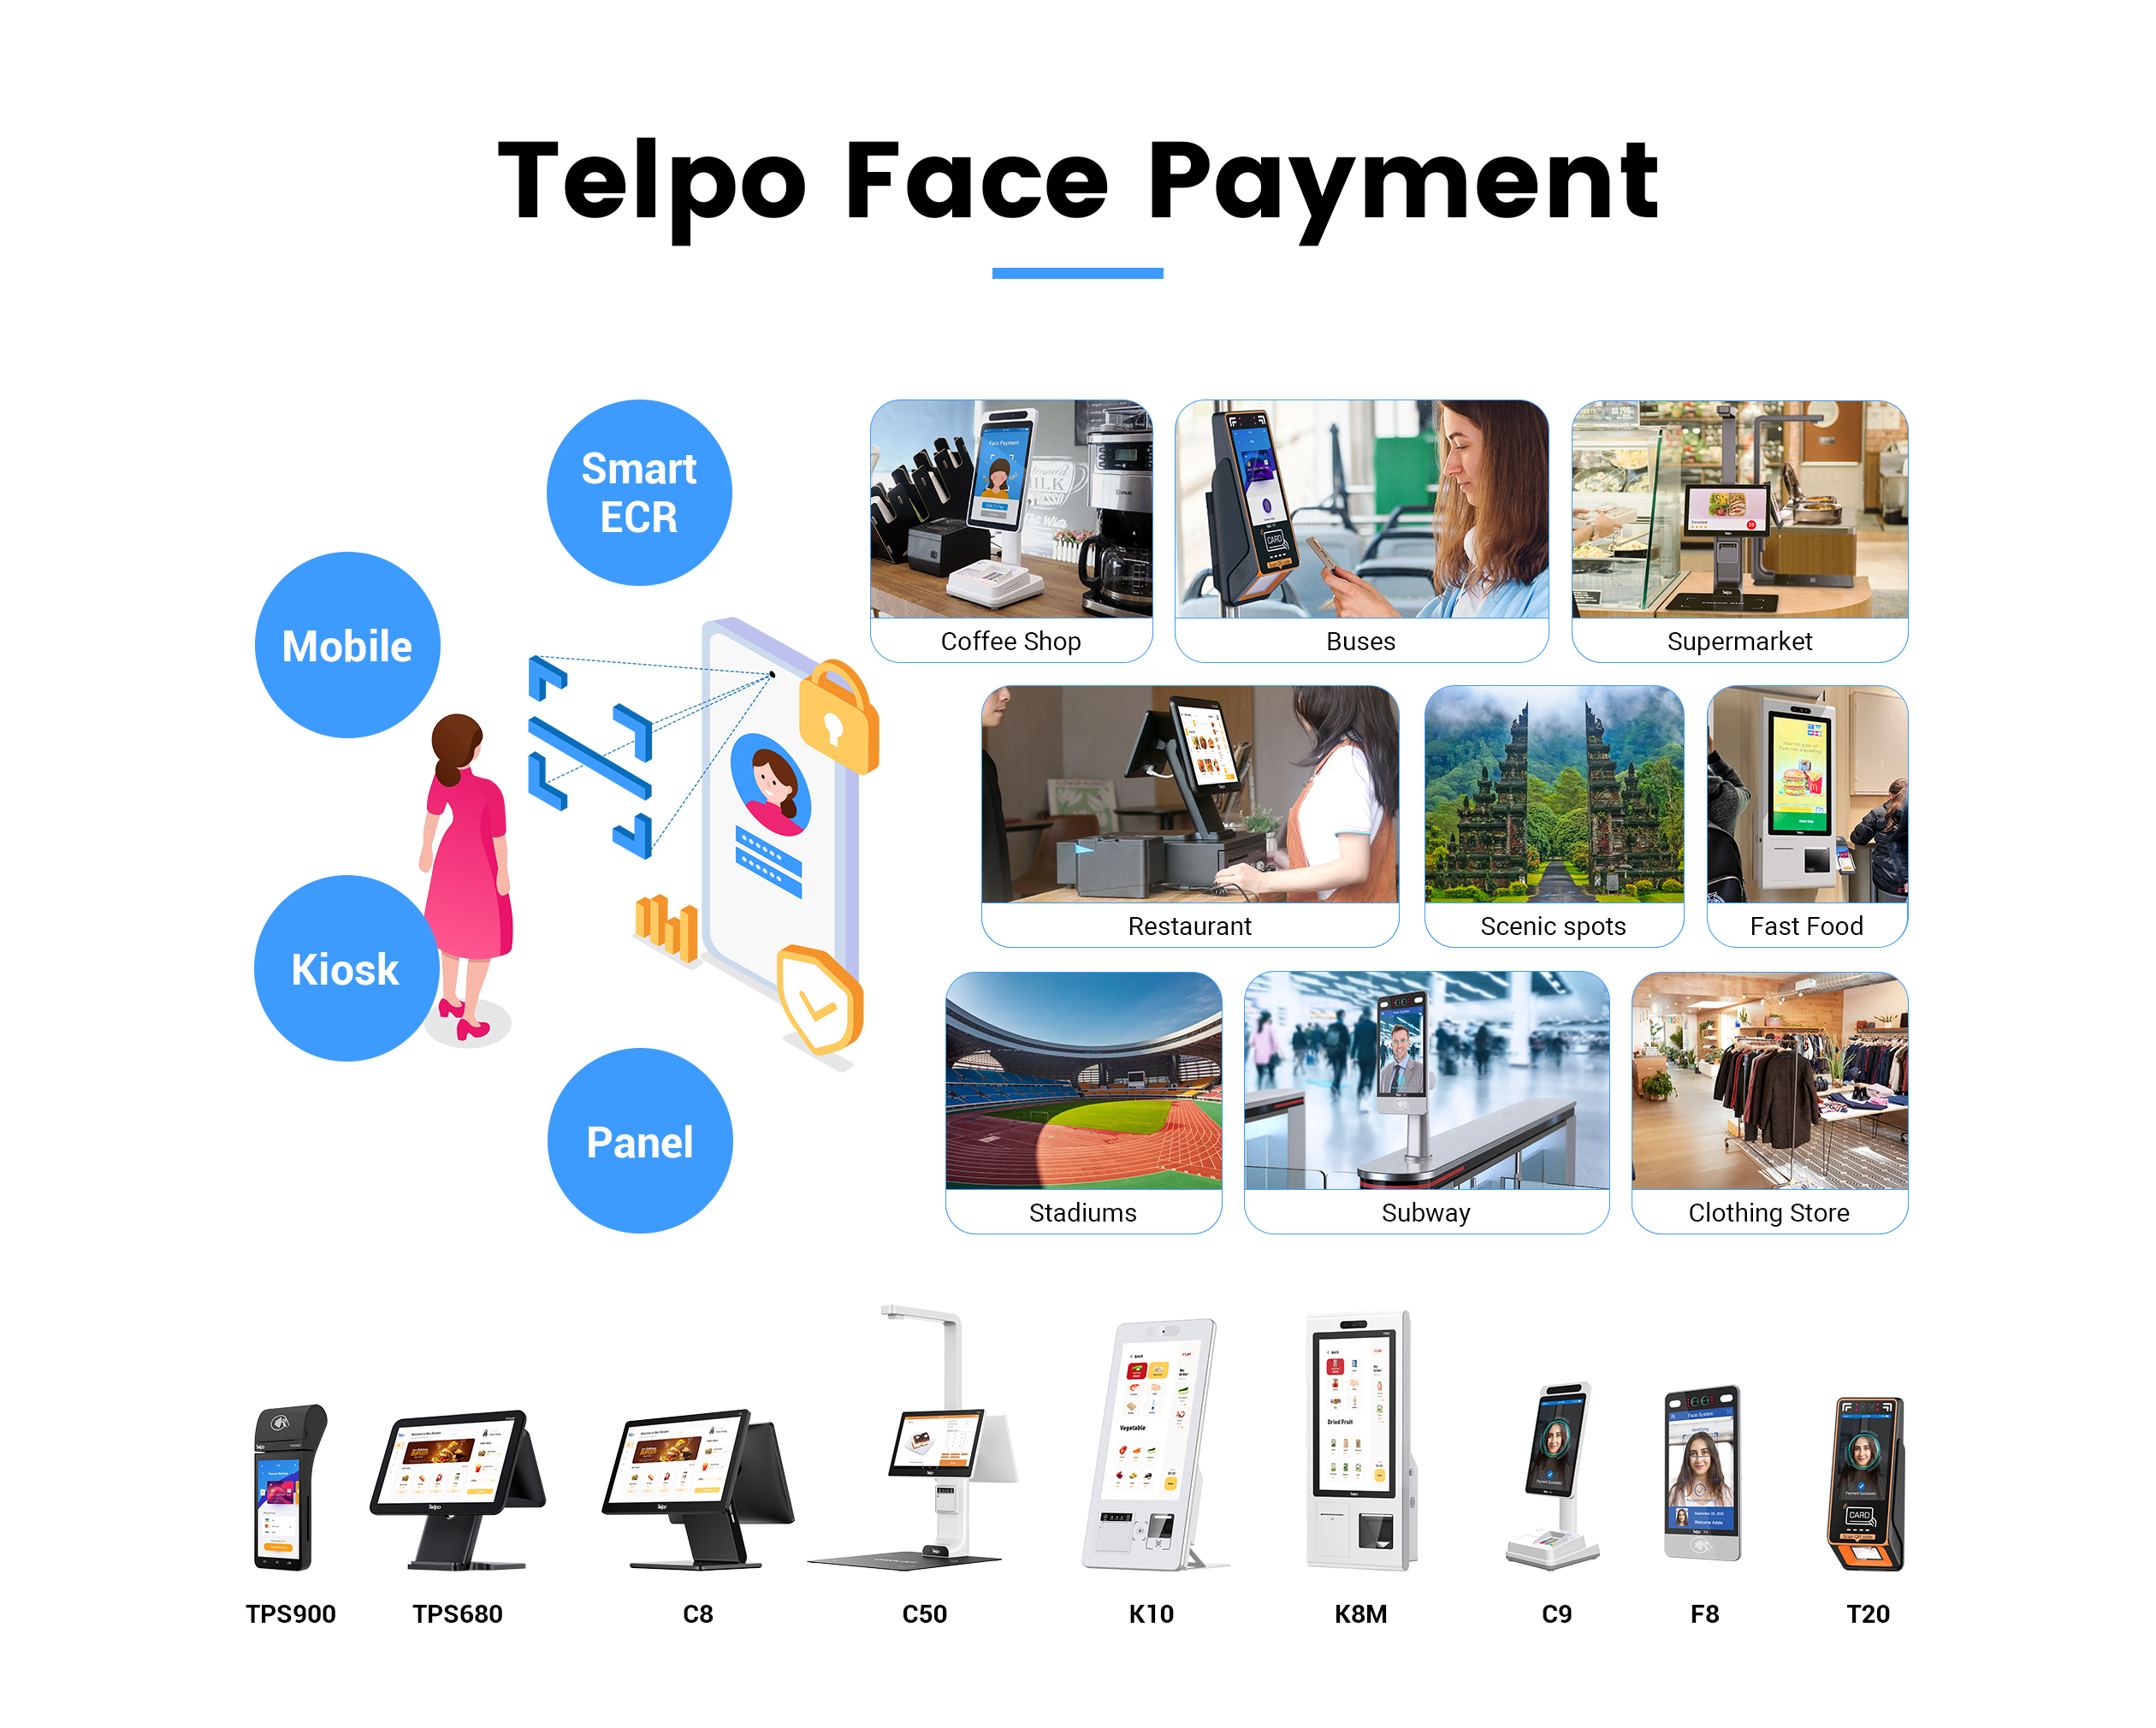 Telpo Face Payment Ecosystem